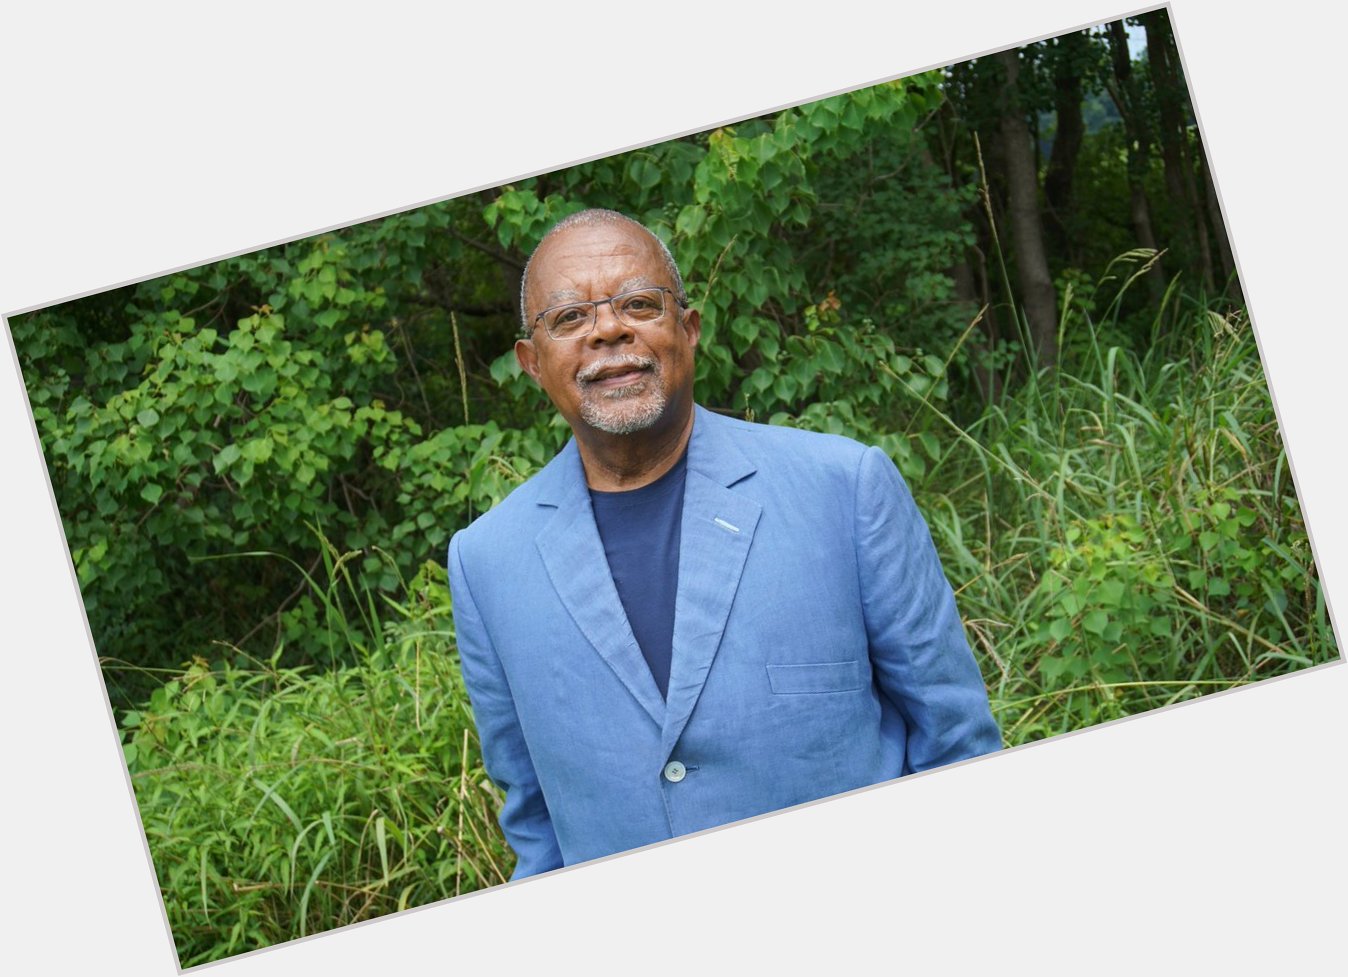 Join us in wishing a happy birthday! What is your favorite film by Henry Louis Gates, Jr.? 